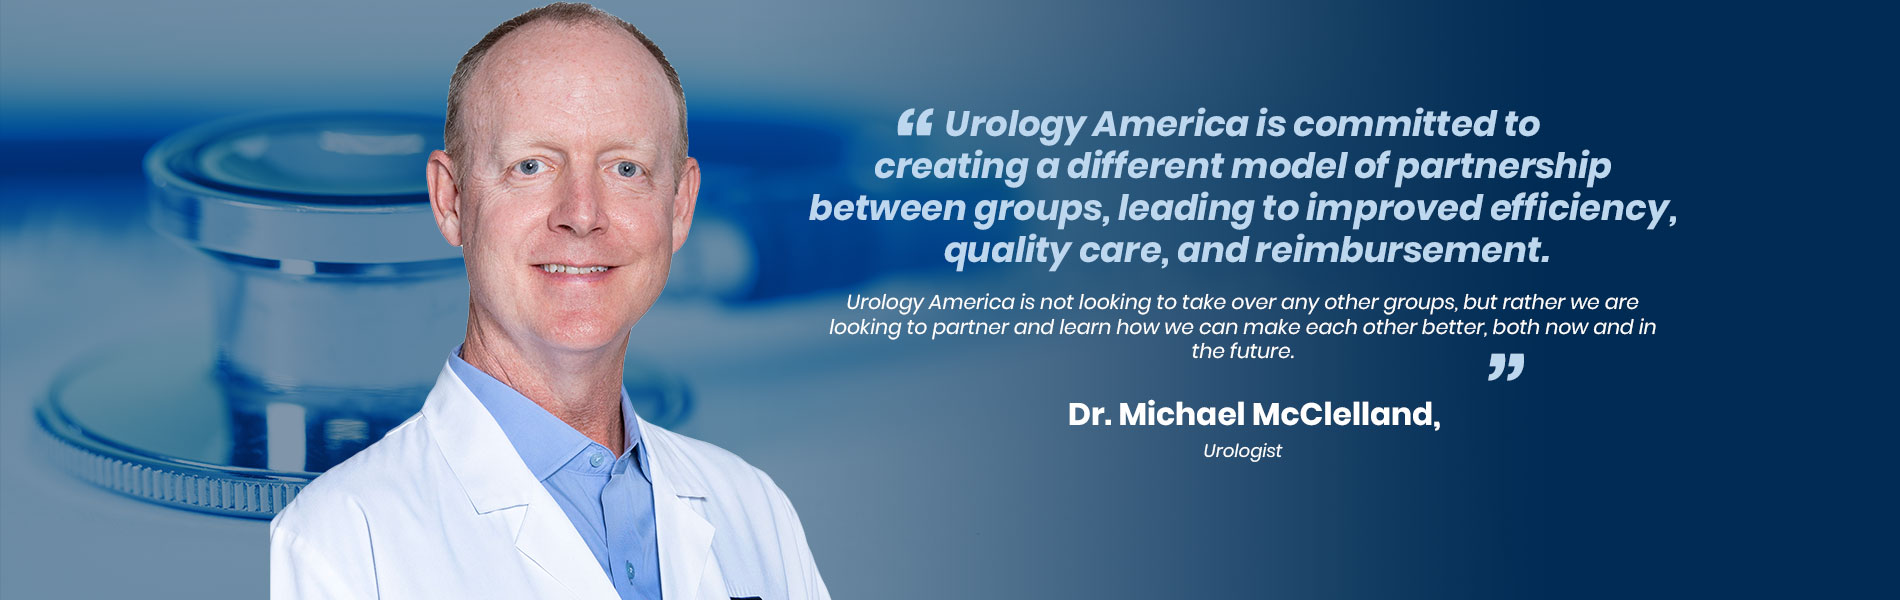 “Urology America is committed to creating a different model of partnership between groups, leading to improved efficiency, quality care, and reimbursement. Urology America is not looking to take over any other groups, but rather we are looking to partner and learn how we can make each other better, both now and in the future”.